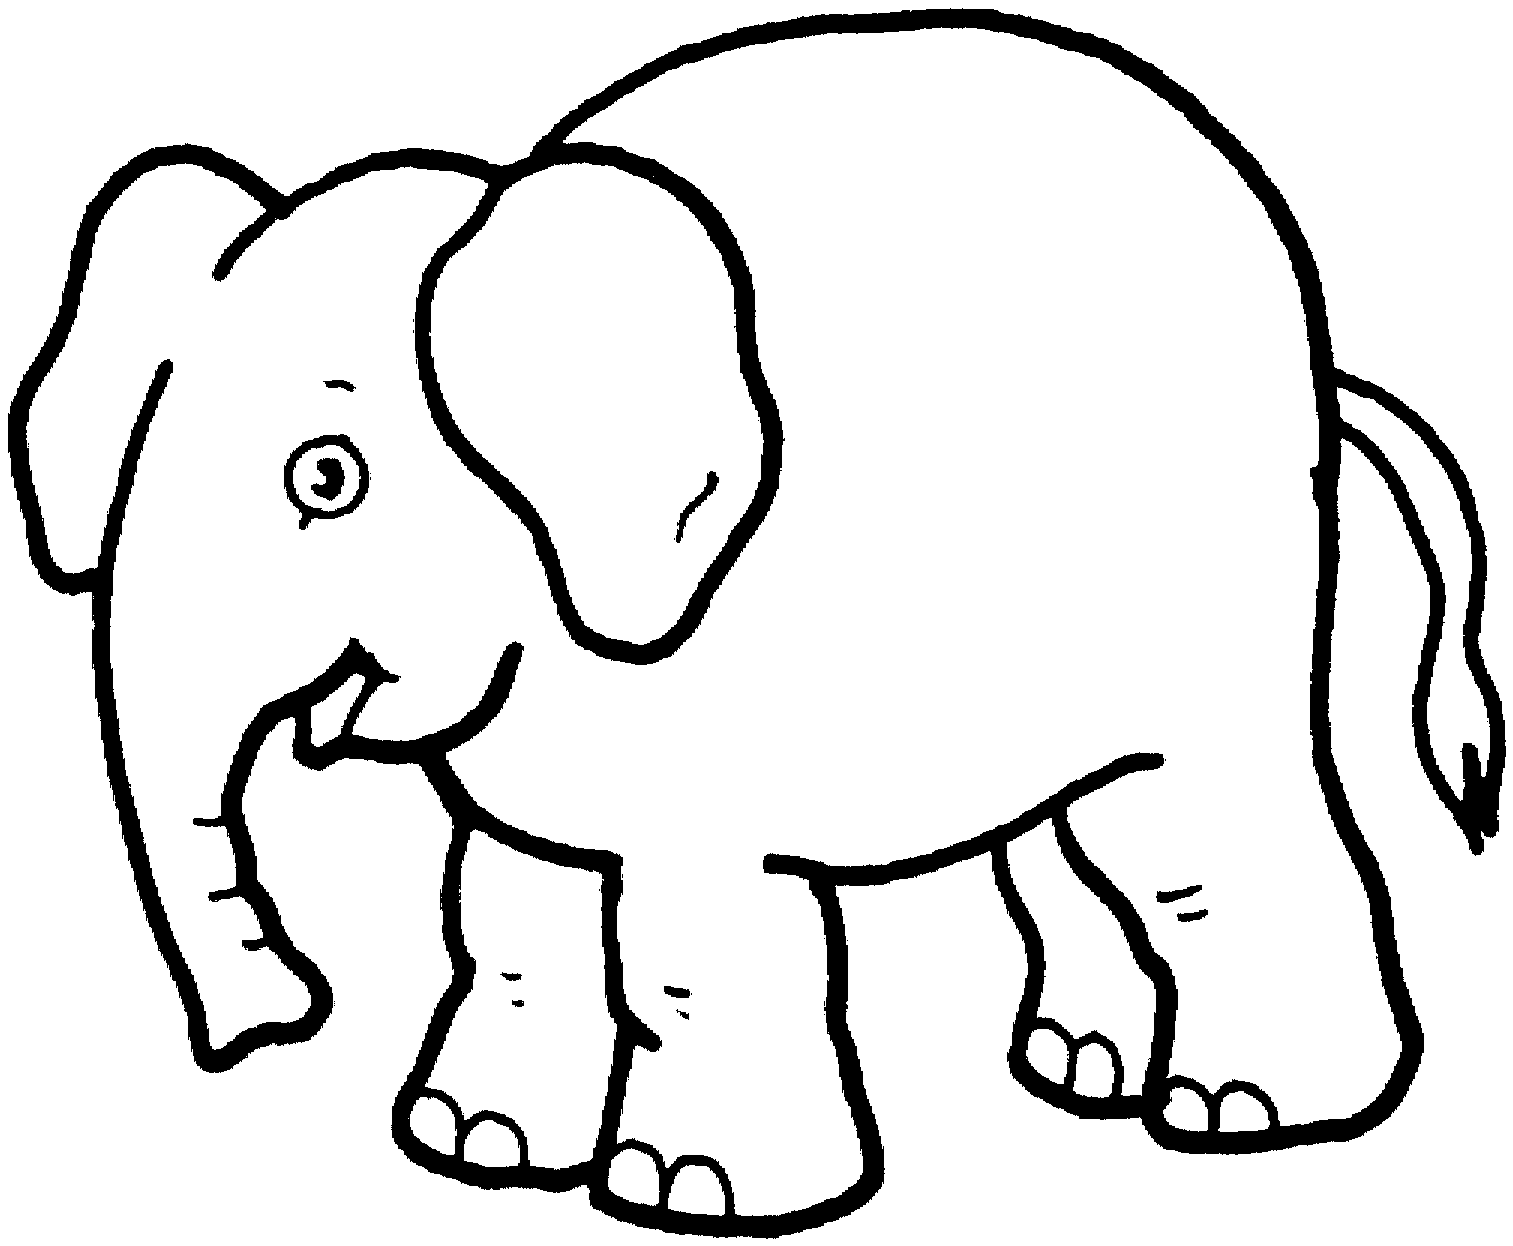 Free Simple Elephant Outline, Download Free Simple Elephant Outline png